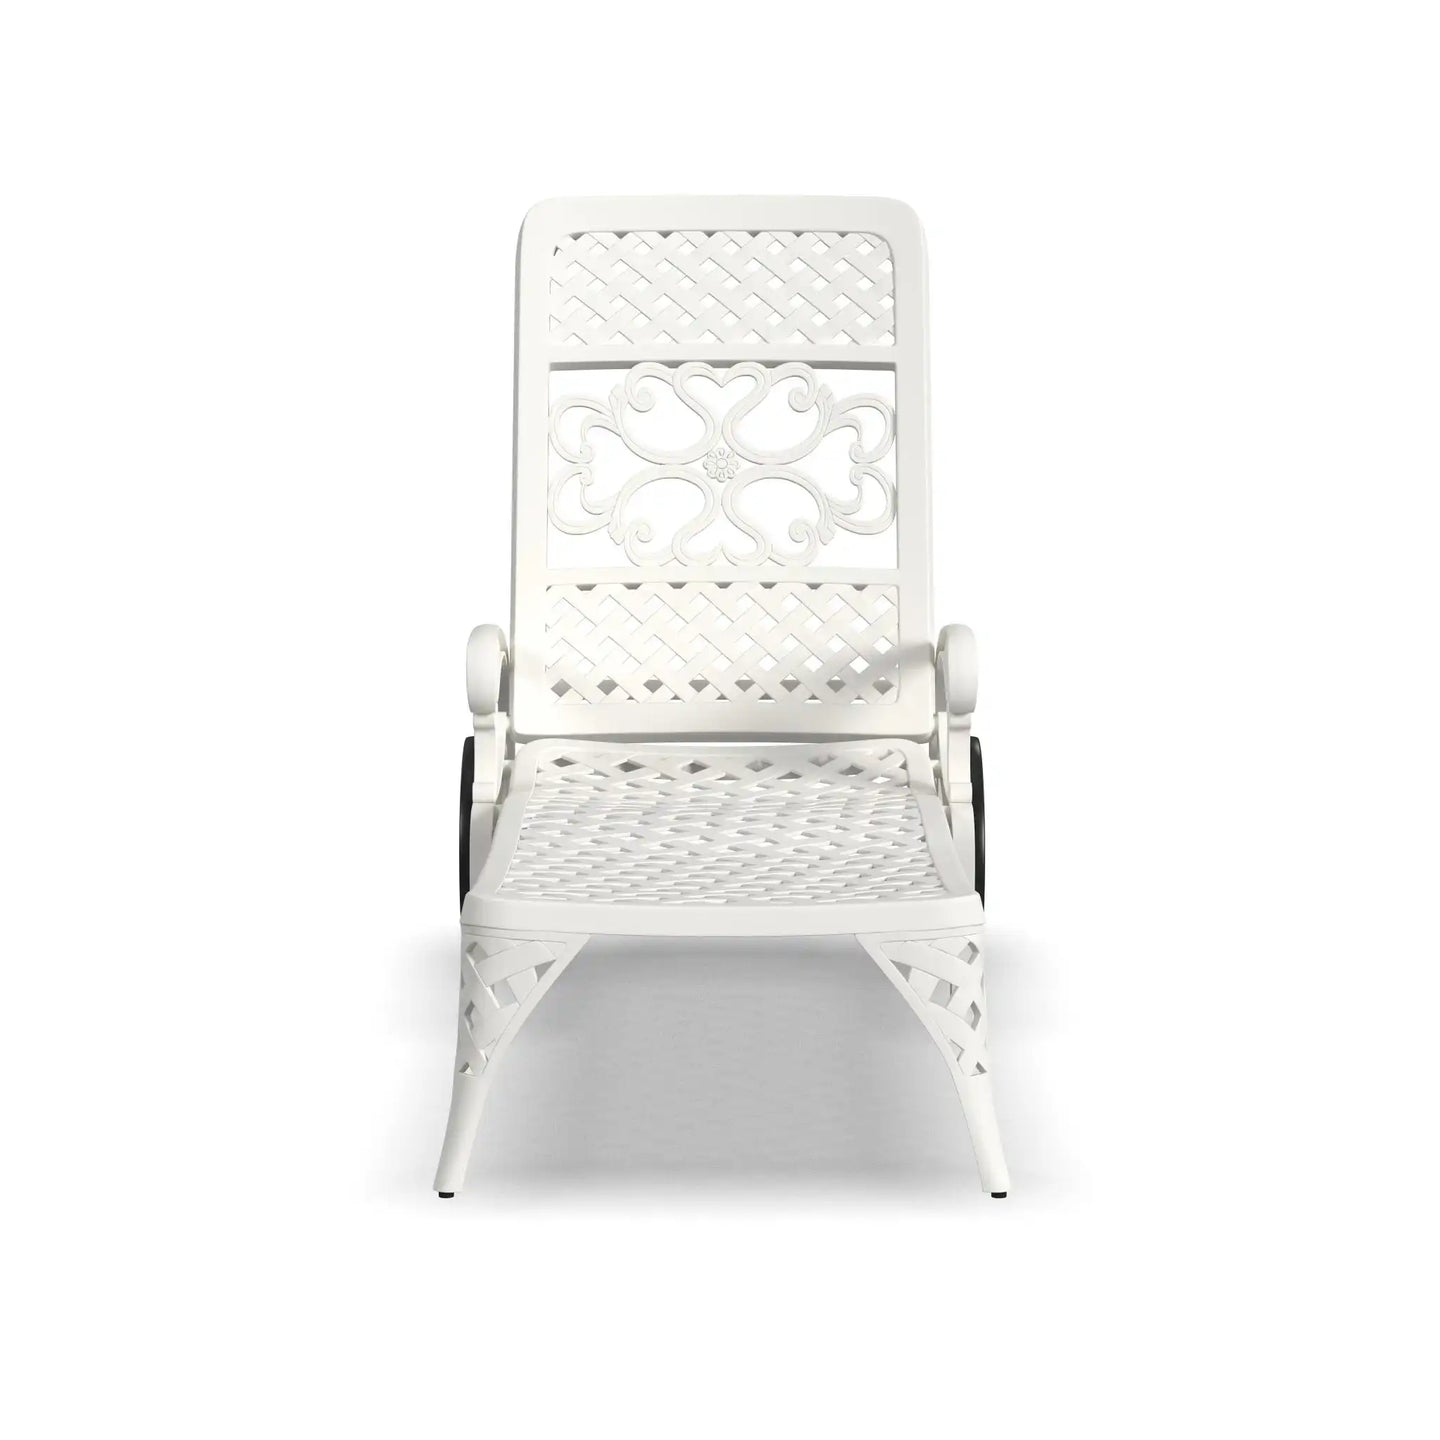 Homestyles Sanibel White Outdoor Chaise Lounge